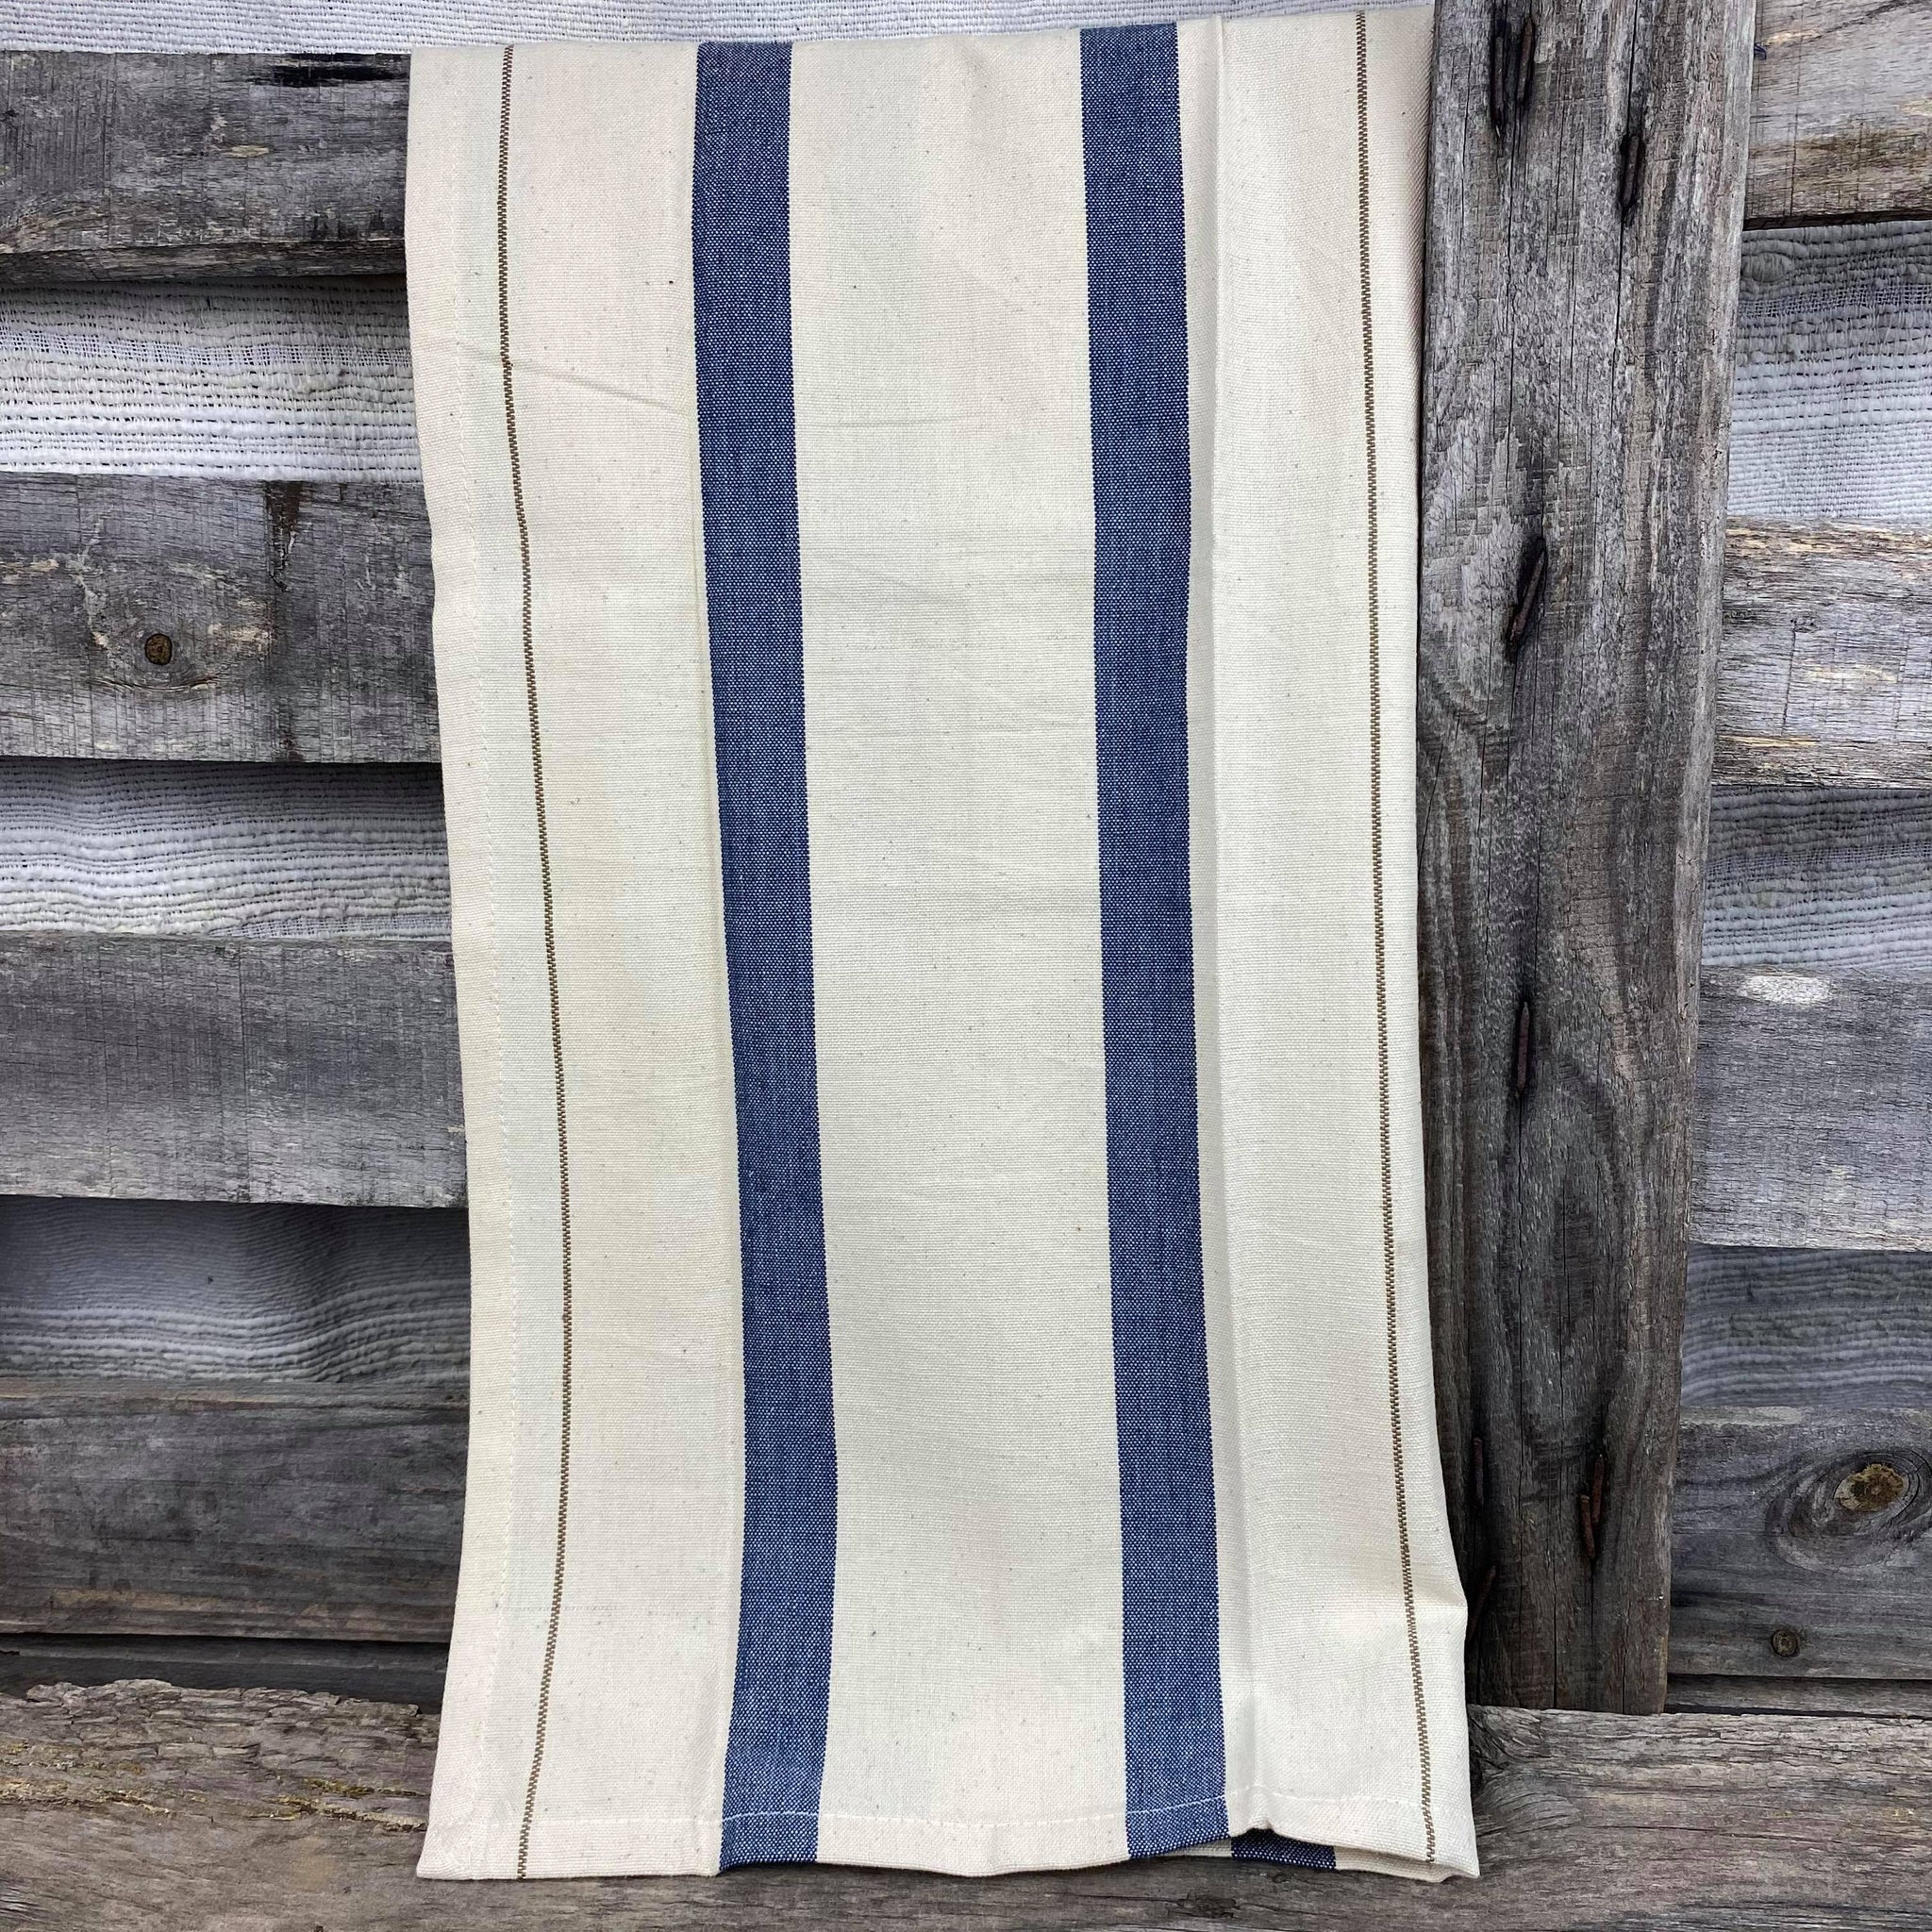 Fair trade ethical handwoven striped cotton tea towels in deep blue